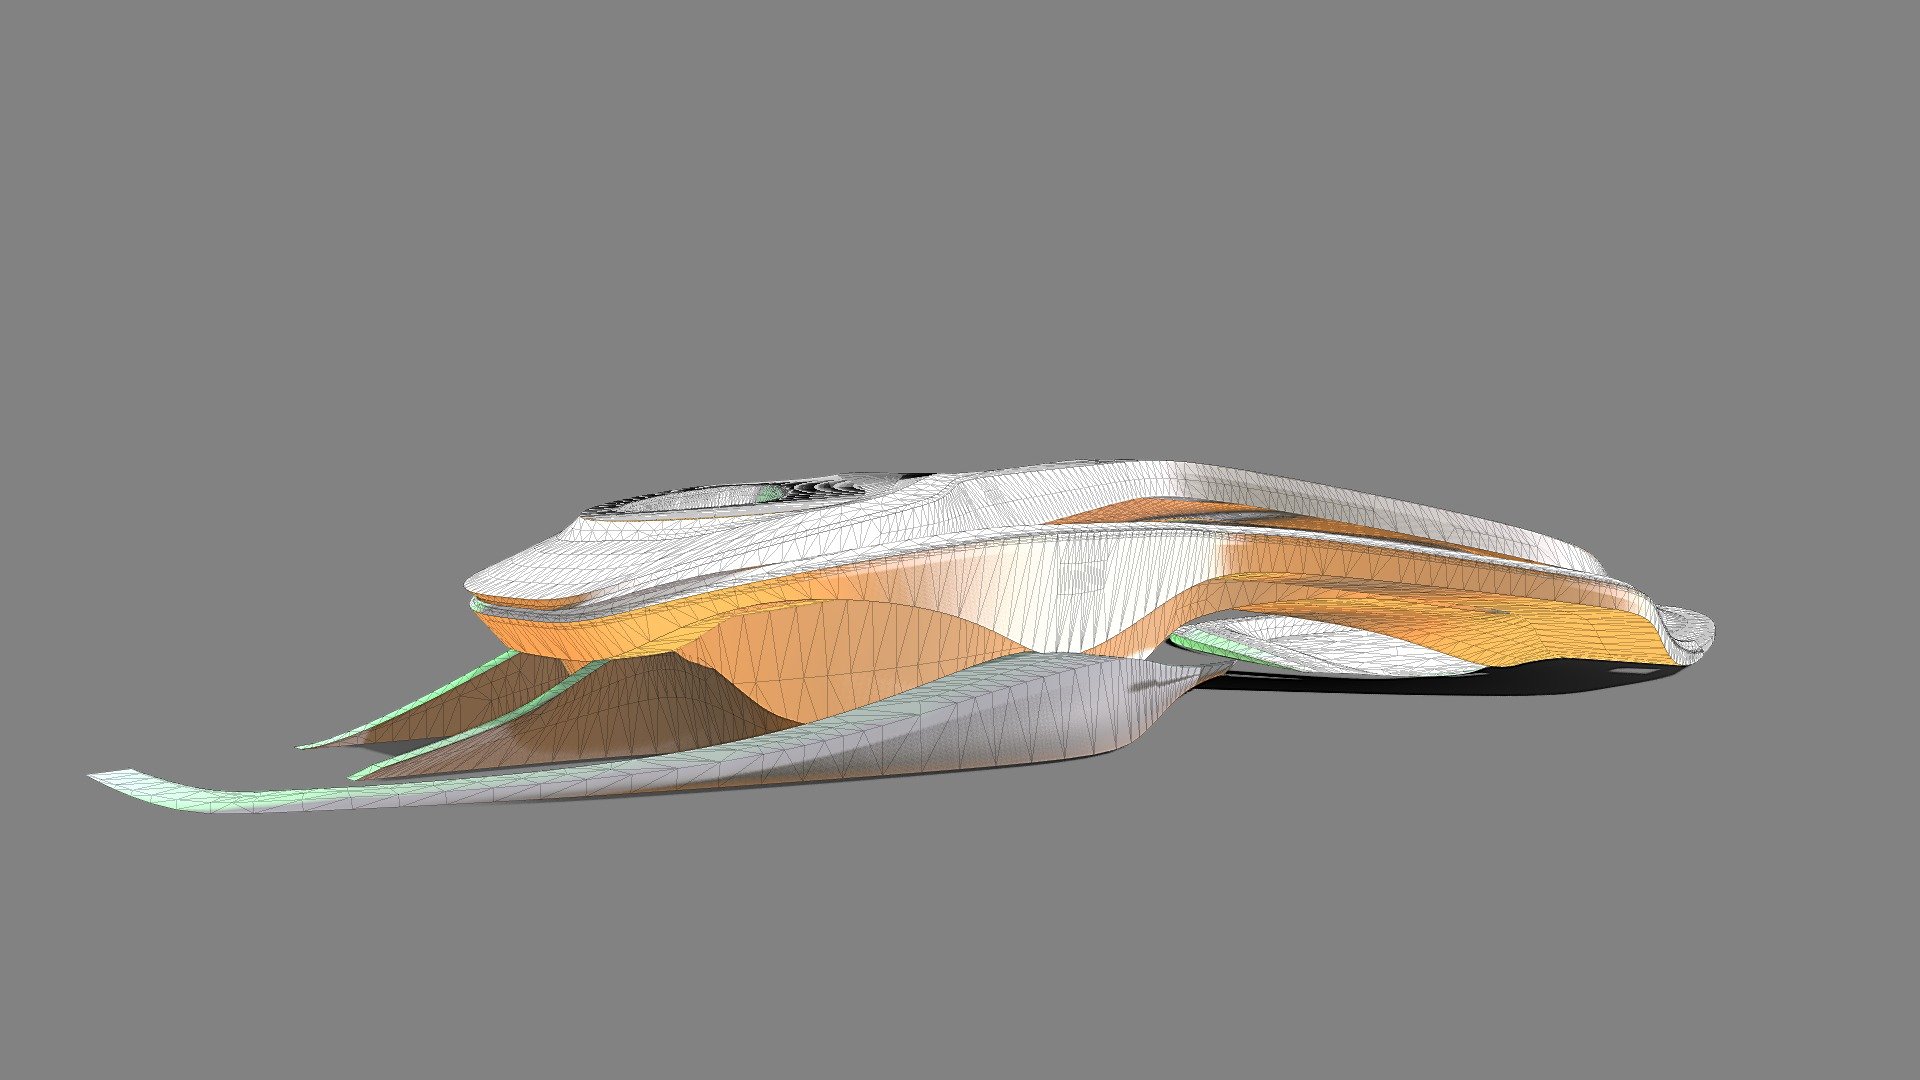 Zaha-morocco, Student outcomes - 3D model by Ahmed.Hassab 3d model